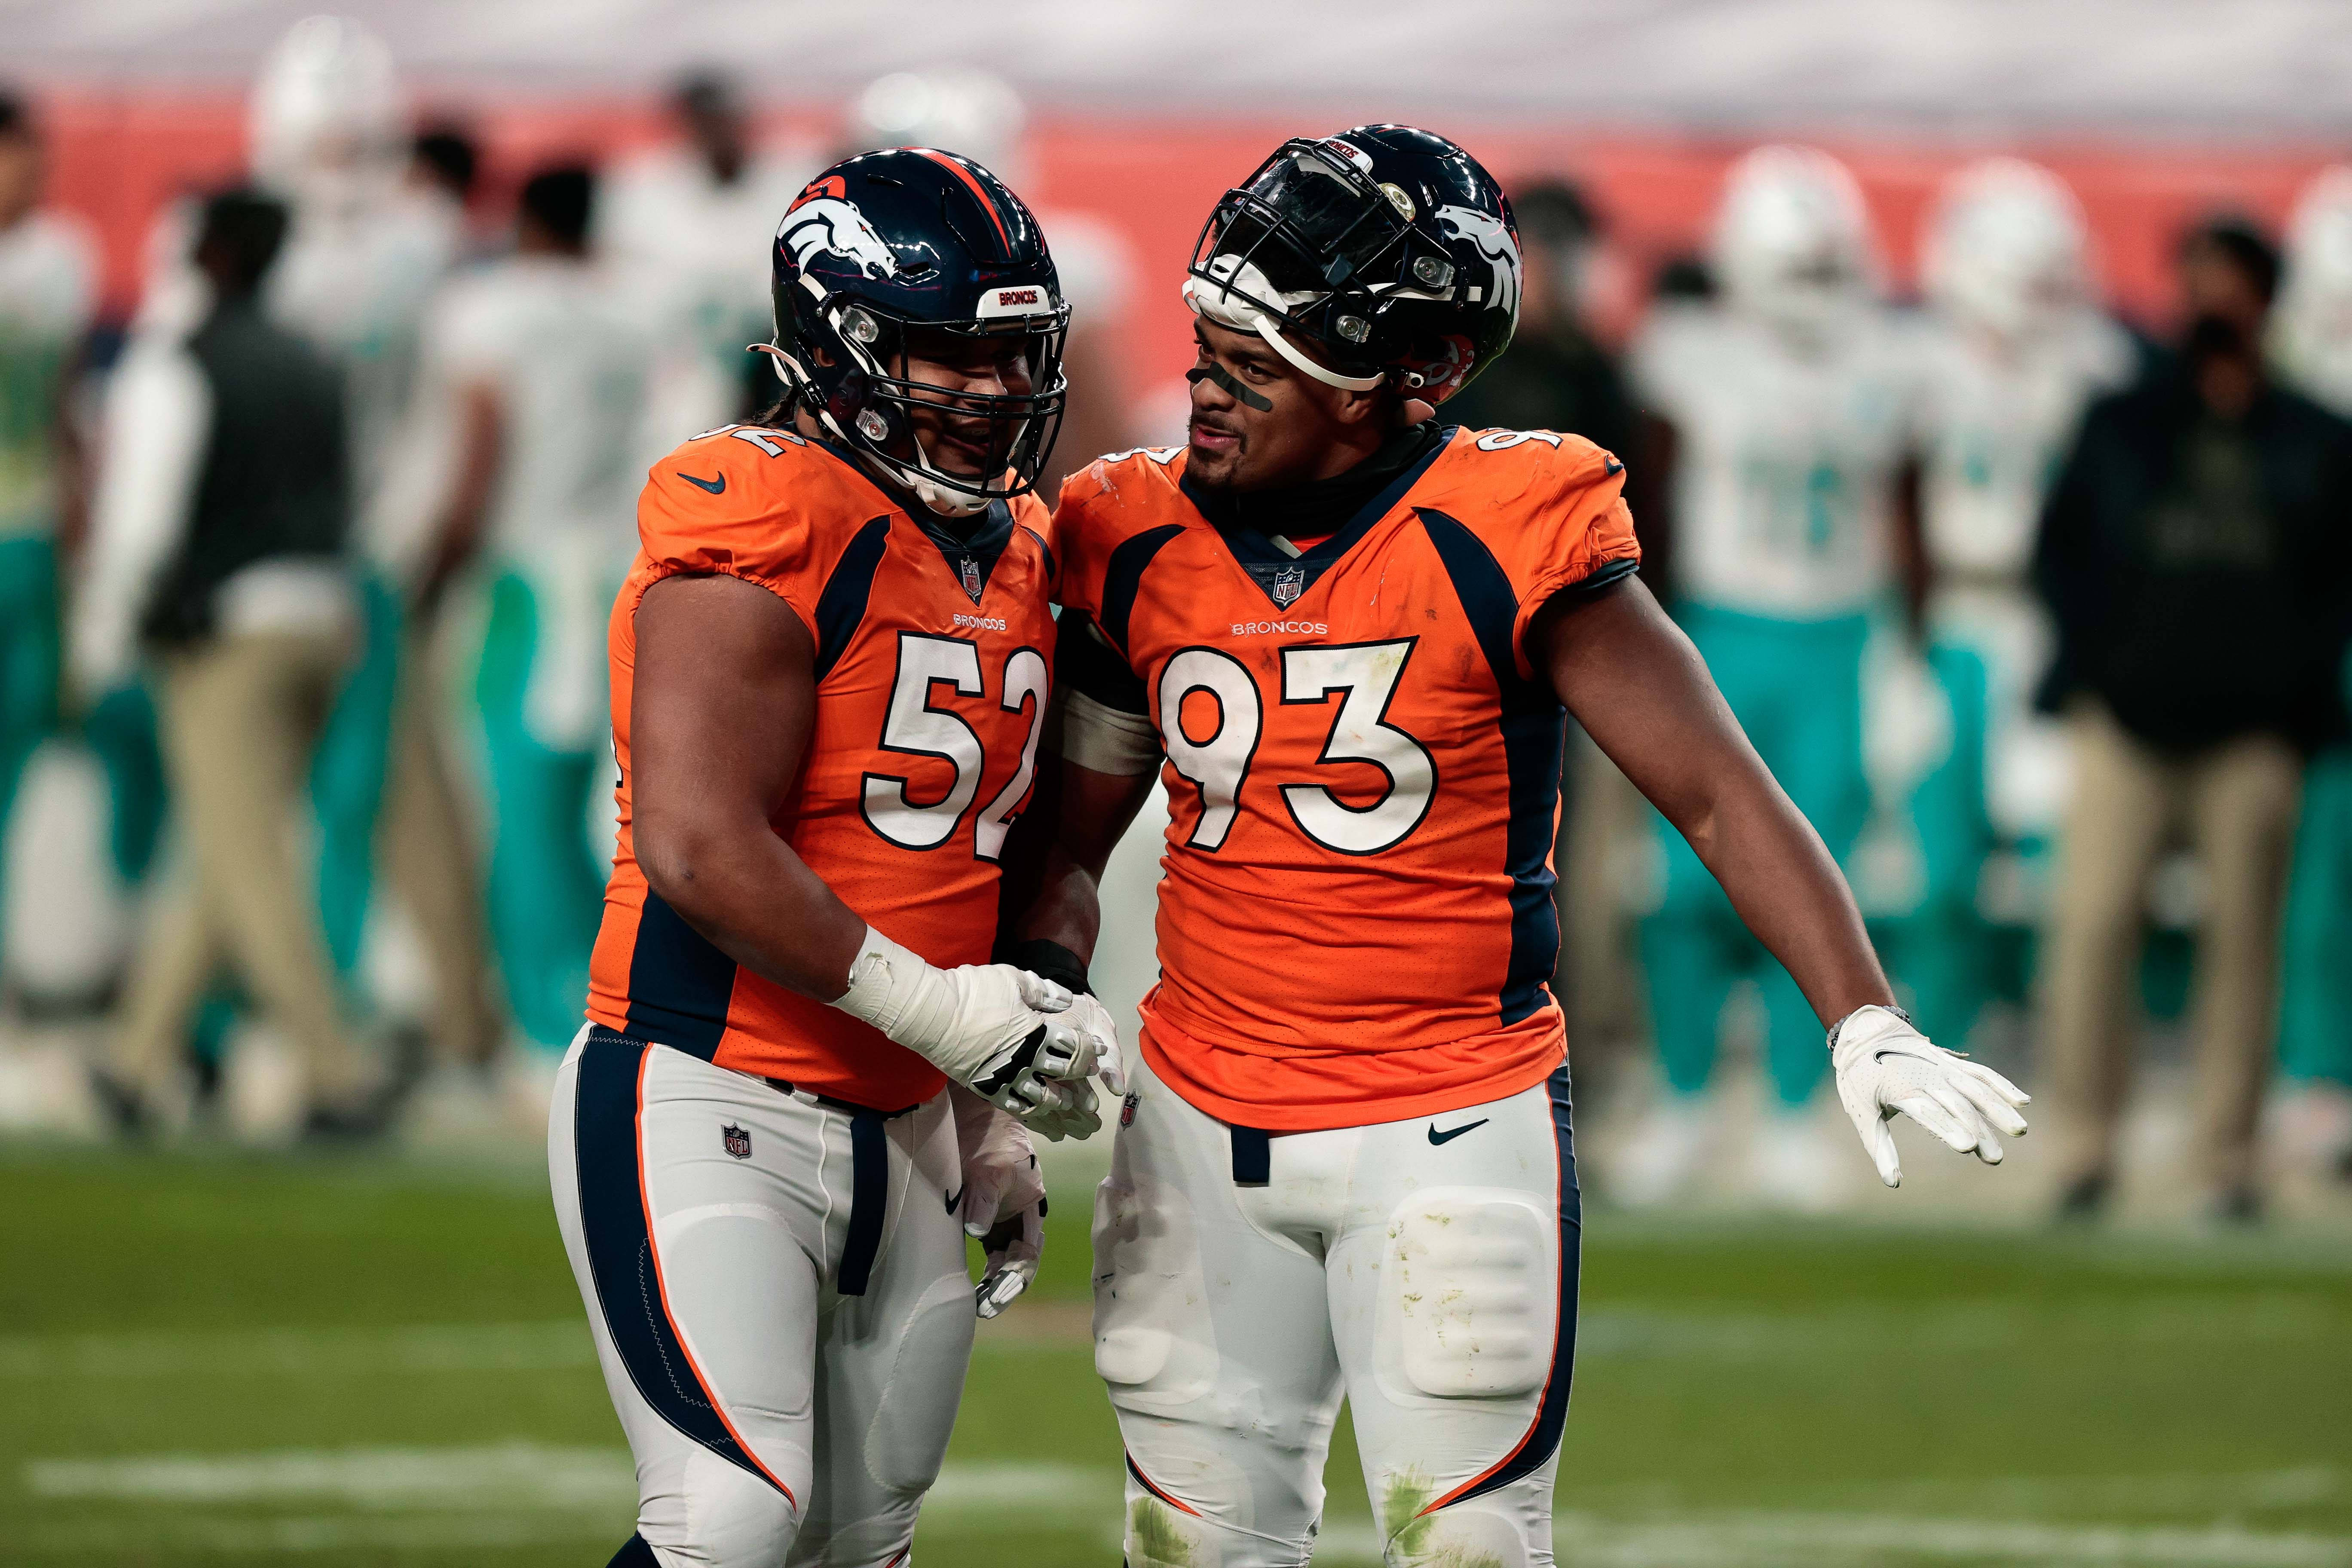 Denver Broncos guard Netane Muti (52) and defensive end Dre'Mont Jones (93) talk during a timeout in the fourth quarter against the Miami Dolphins at Empower Field at Mile High.